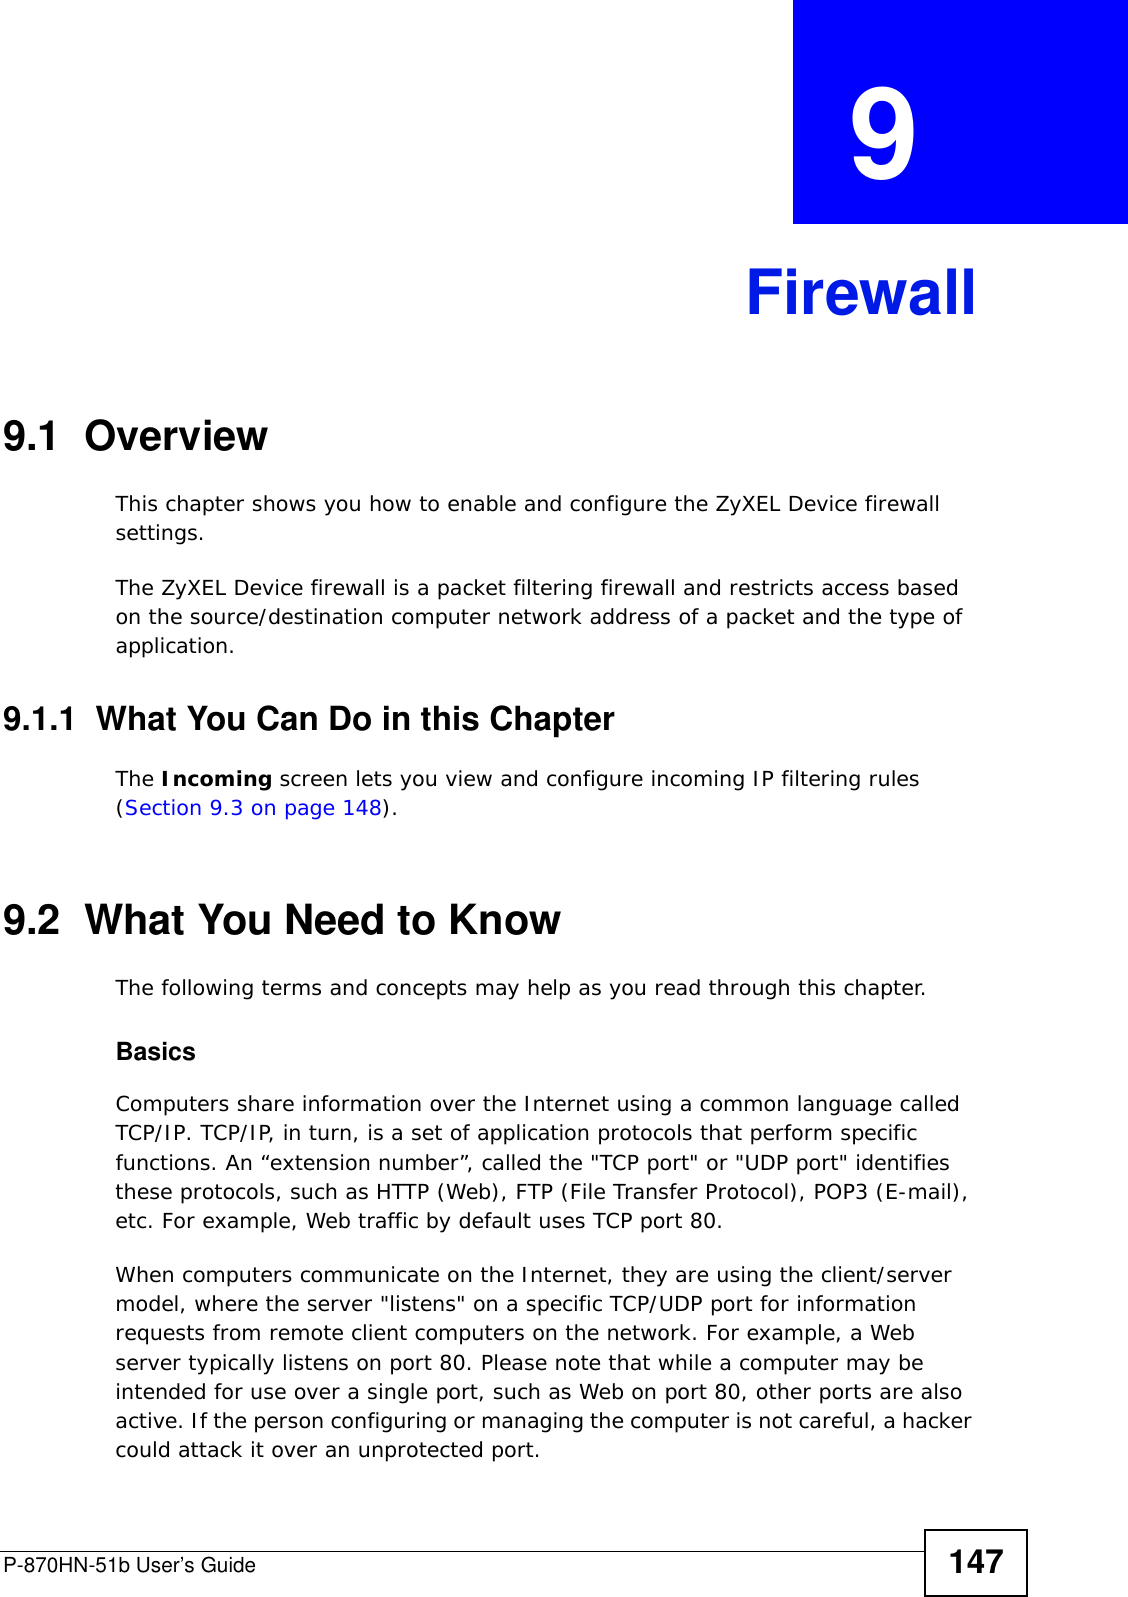 P-870HN-51b User’s Guide 147CHAPTER  9 Firewall9.1  Overview This chapter shows you how to enable and configure the ZyXEL Device firewall settings.The ZyXEL Device firewall is a packet filtering firewall and restricts access based on the source/destination computer network address of a packet and the type of application. 9.1.1  What You Can Do in this ChapterThe Incoming screen lets you view and configure incoming IP filtering rules (Section 9.3 on page 148).9.2  What You Need to KnowThe following terms and concepts may help as you read through this chapter.BasicsComputers share information over the Internet using a common language called TCP/IP. TCP/IP, in turn, is a set of application protocols that perform specific functions. An “extension number”, called the &quot;TCP port&quot; or &quot;UDP port&quot; identifies these protocols, such as HTTP (Web), FTP (File Transfer Protocol), POP3 (E-mail), etc. For example, Web traffic by default uses TCP port 80. When computers communicate on the Internet, they are using the client/server model, where the server &quot;listens&quot; on a specific TCP/UDP port for information requests from remote client computers on the network. For example, a Web server typically listens on port 80. Please note that while a computer may be intended for use over a single port, such as Web on port 80, other ports are also active. If the person configuring or managing the computer is not careful, a hacker could attack it over an unprotected port. 